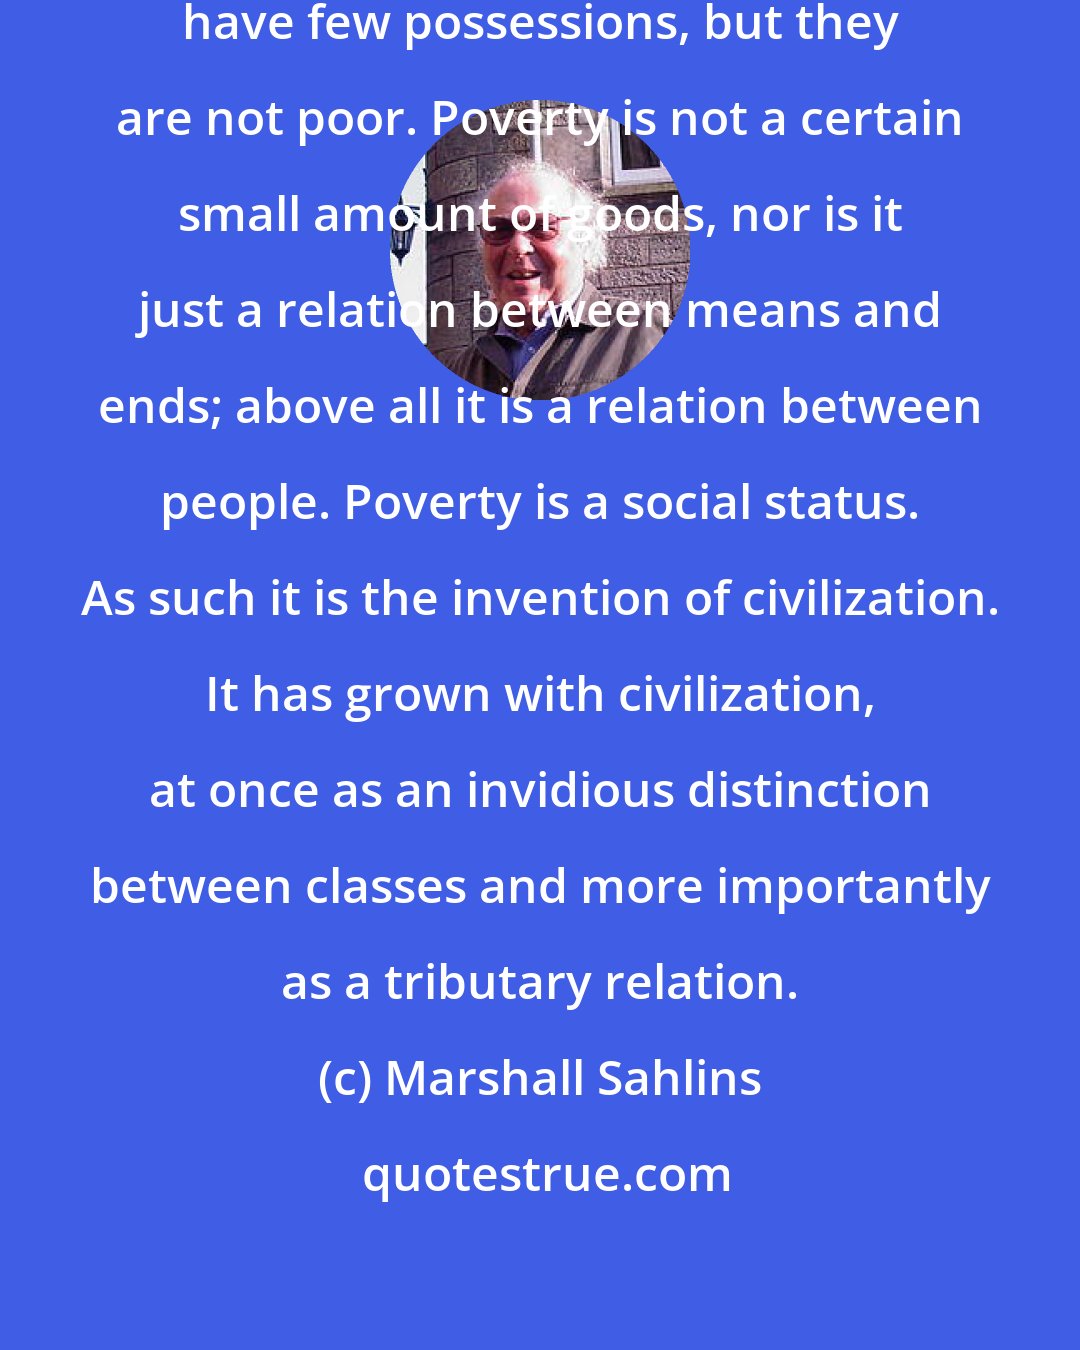 Marshall Sahlins: The world's most 'primitive' people have few possessions, but they are not poor. Poverty is not a certain small amount of goods, nor is it just a relation between means and ends; above all it is a relation between people. Poverty is a social status. As such it is the invention of civilization. It has grown with civilization, at once as an invidious distinction between classes and more importantly as a tributary relation.